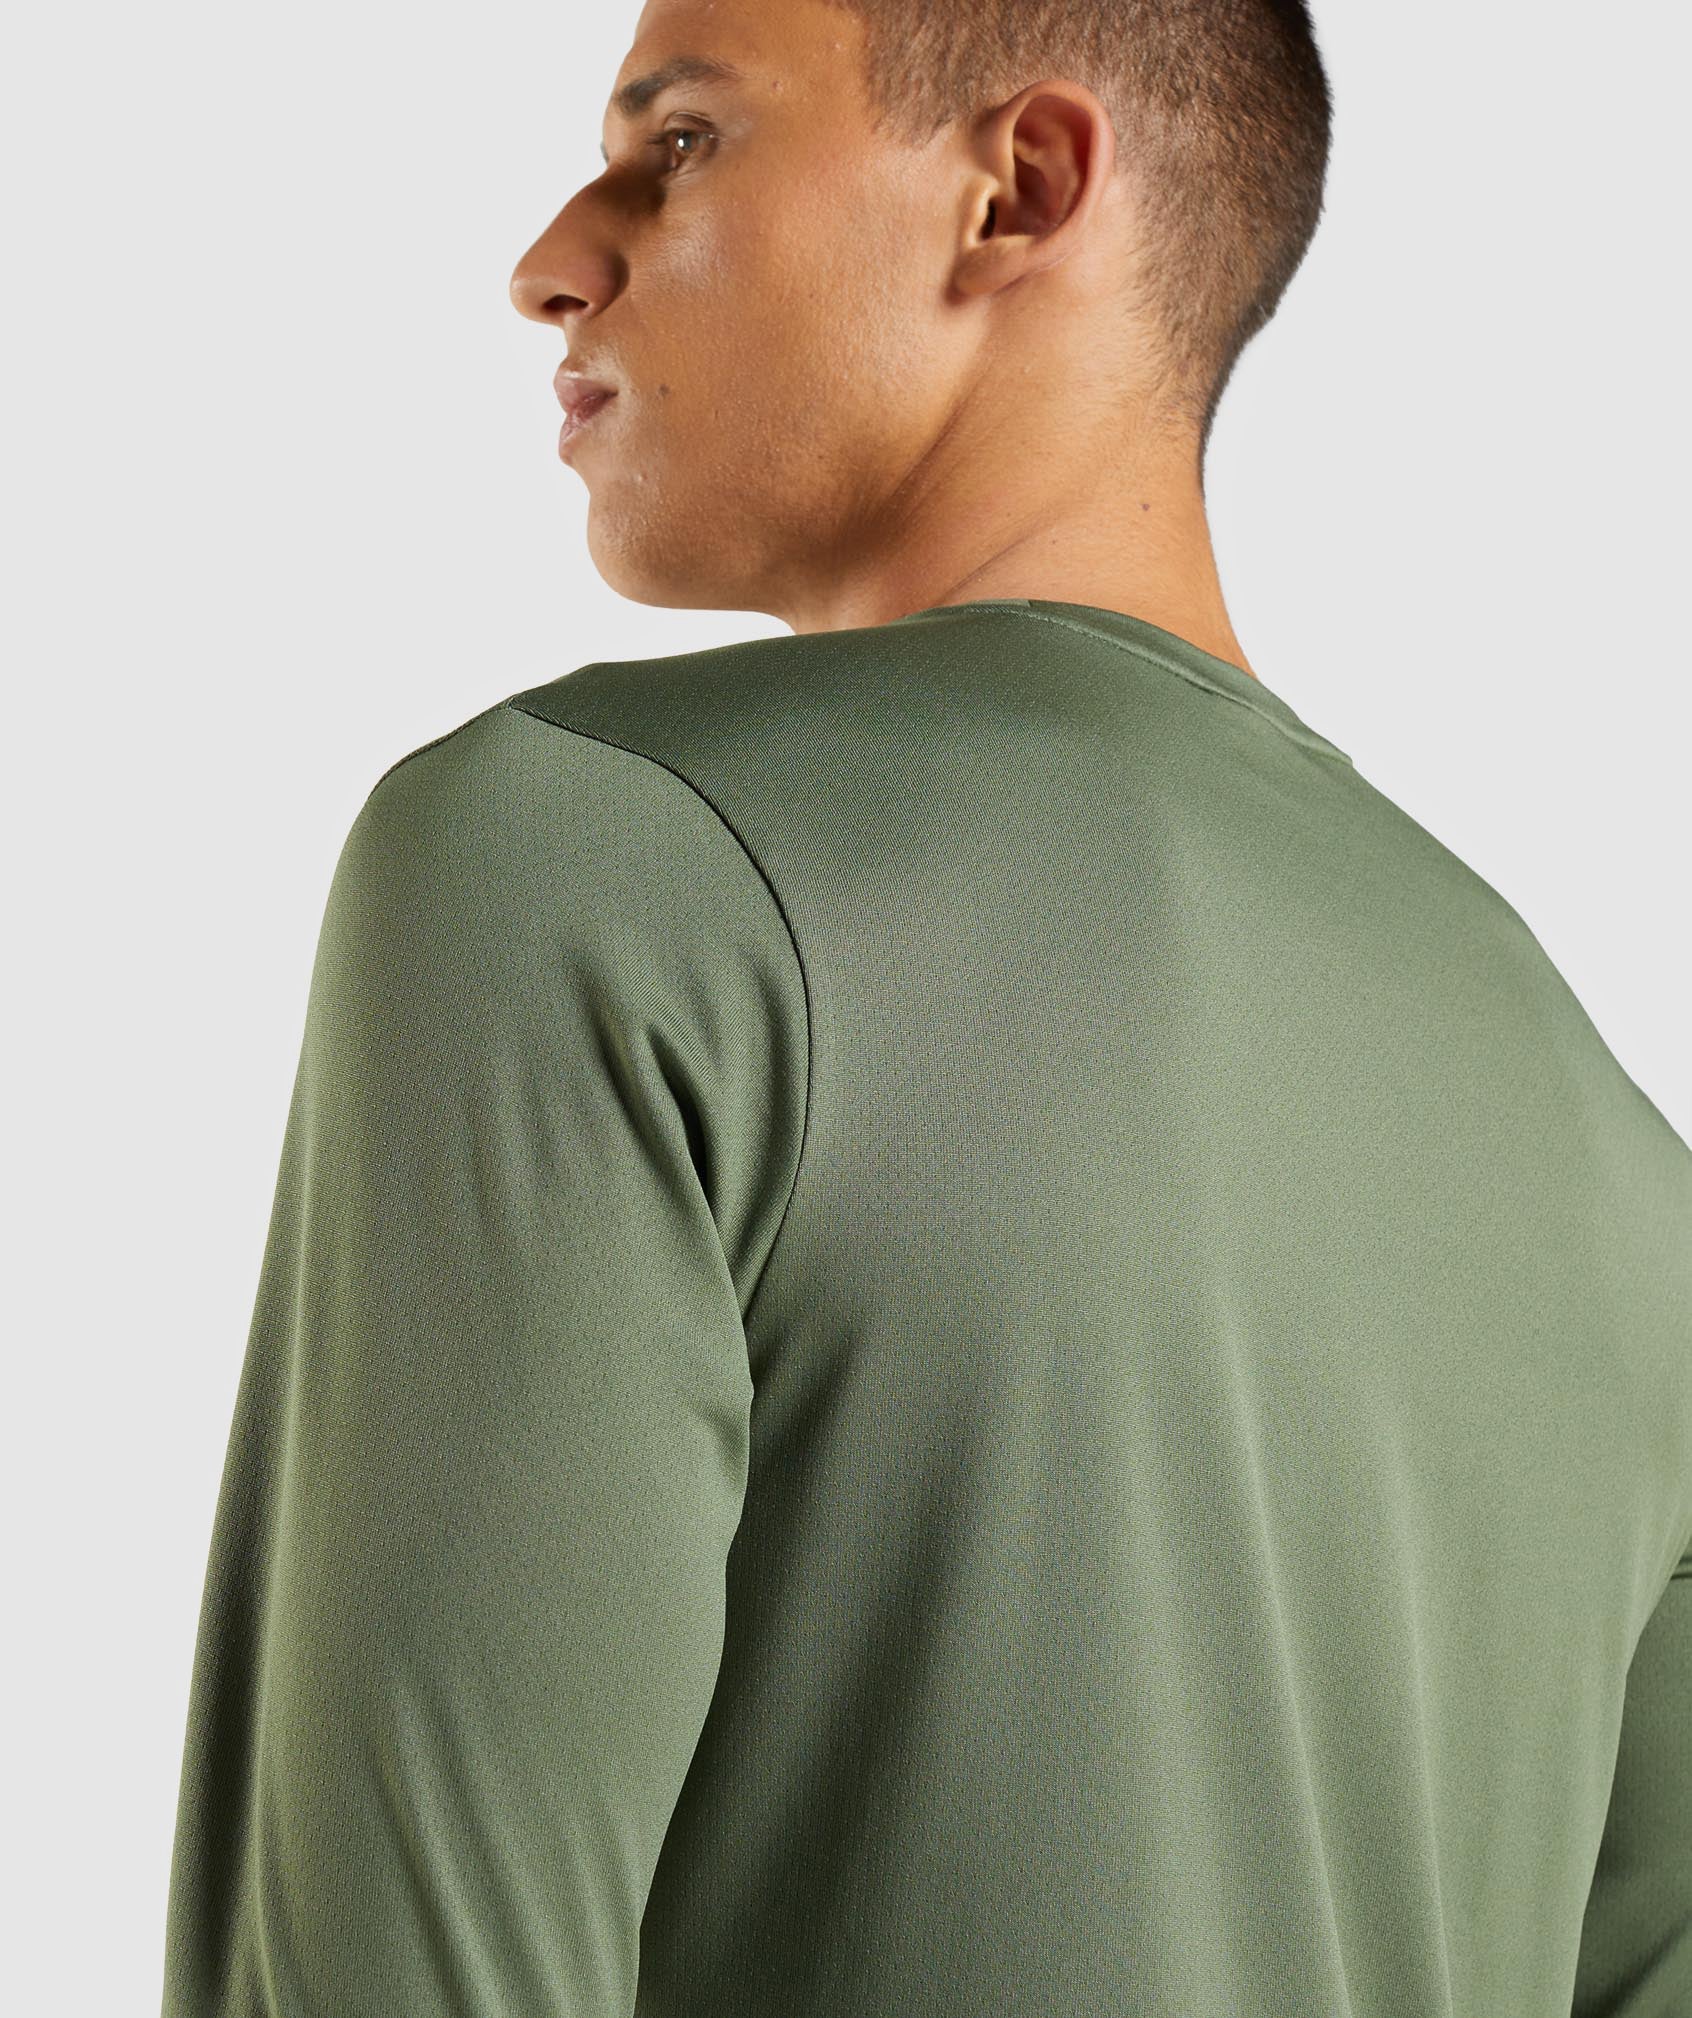 Arrival Long Sleeve T-Shirt in Core Olive